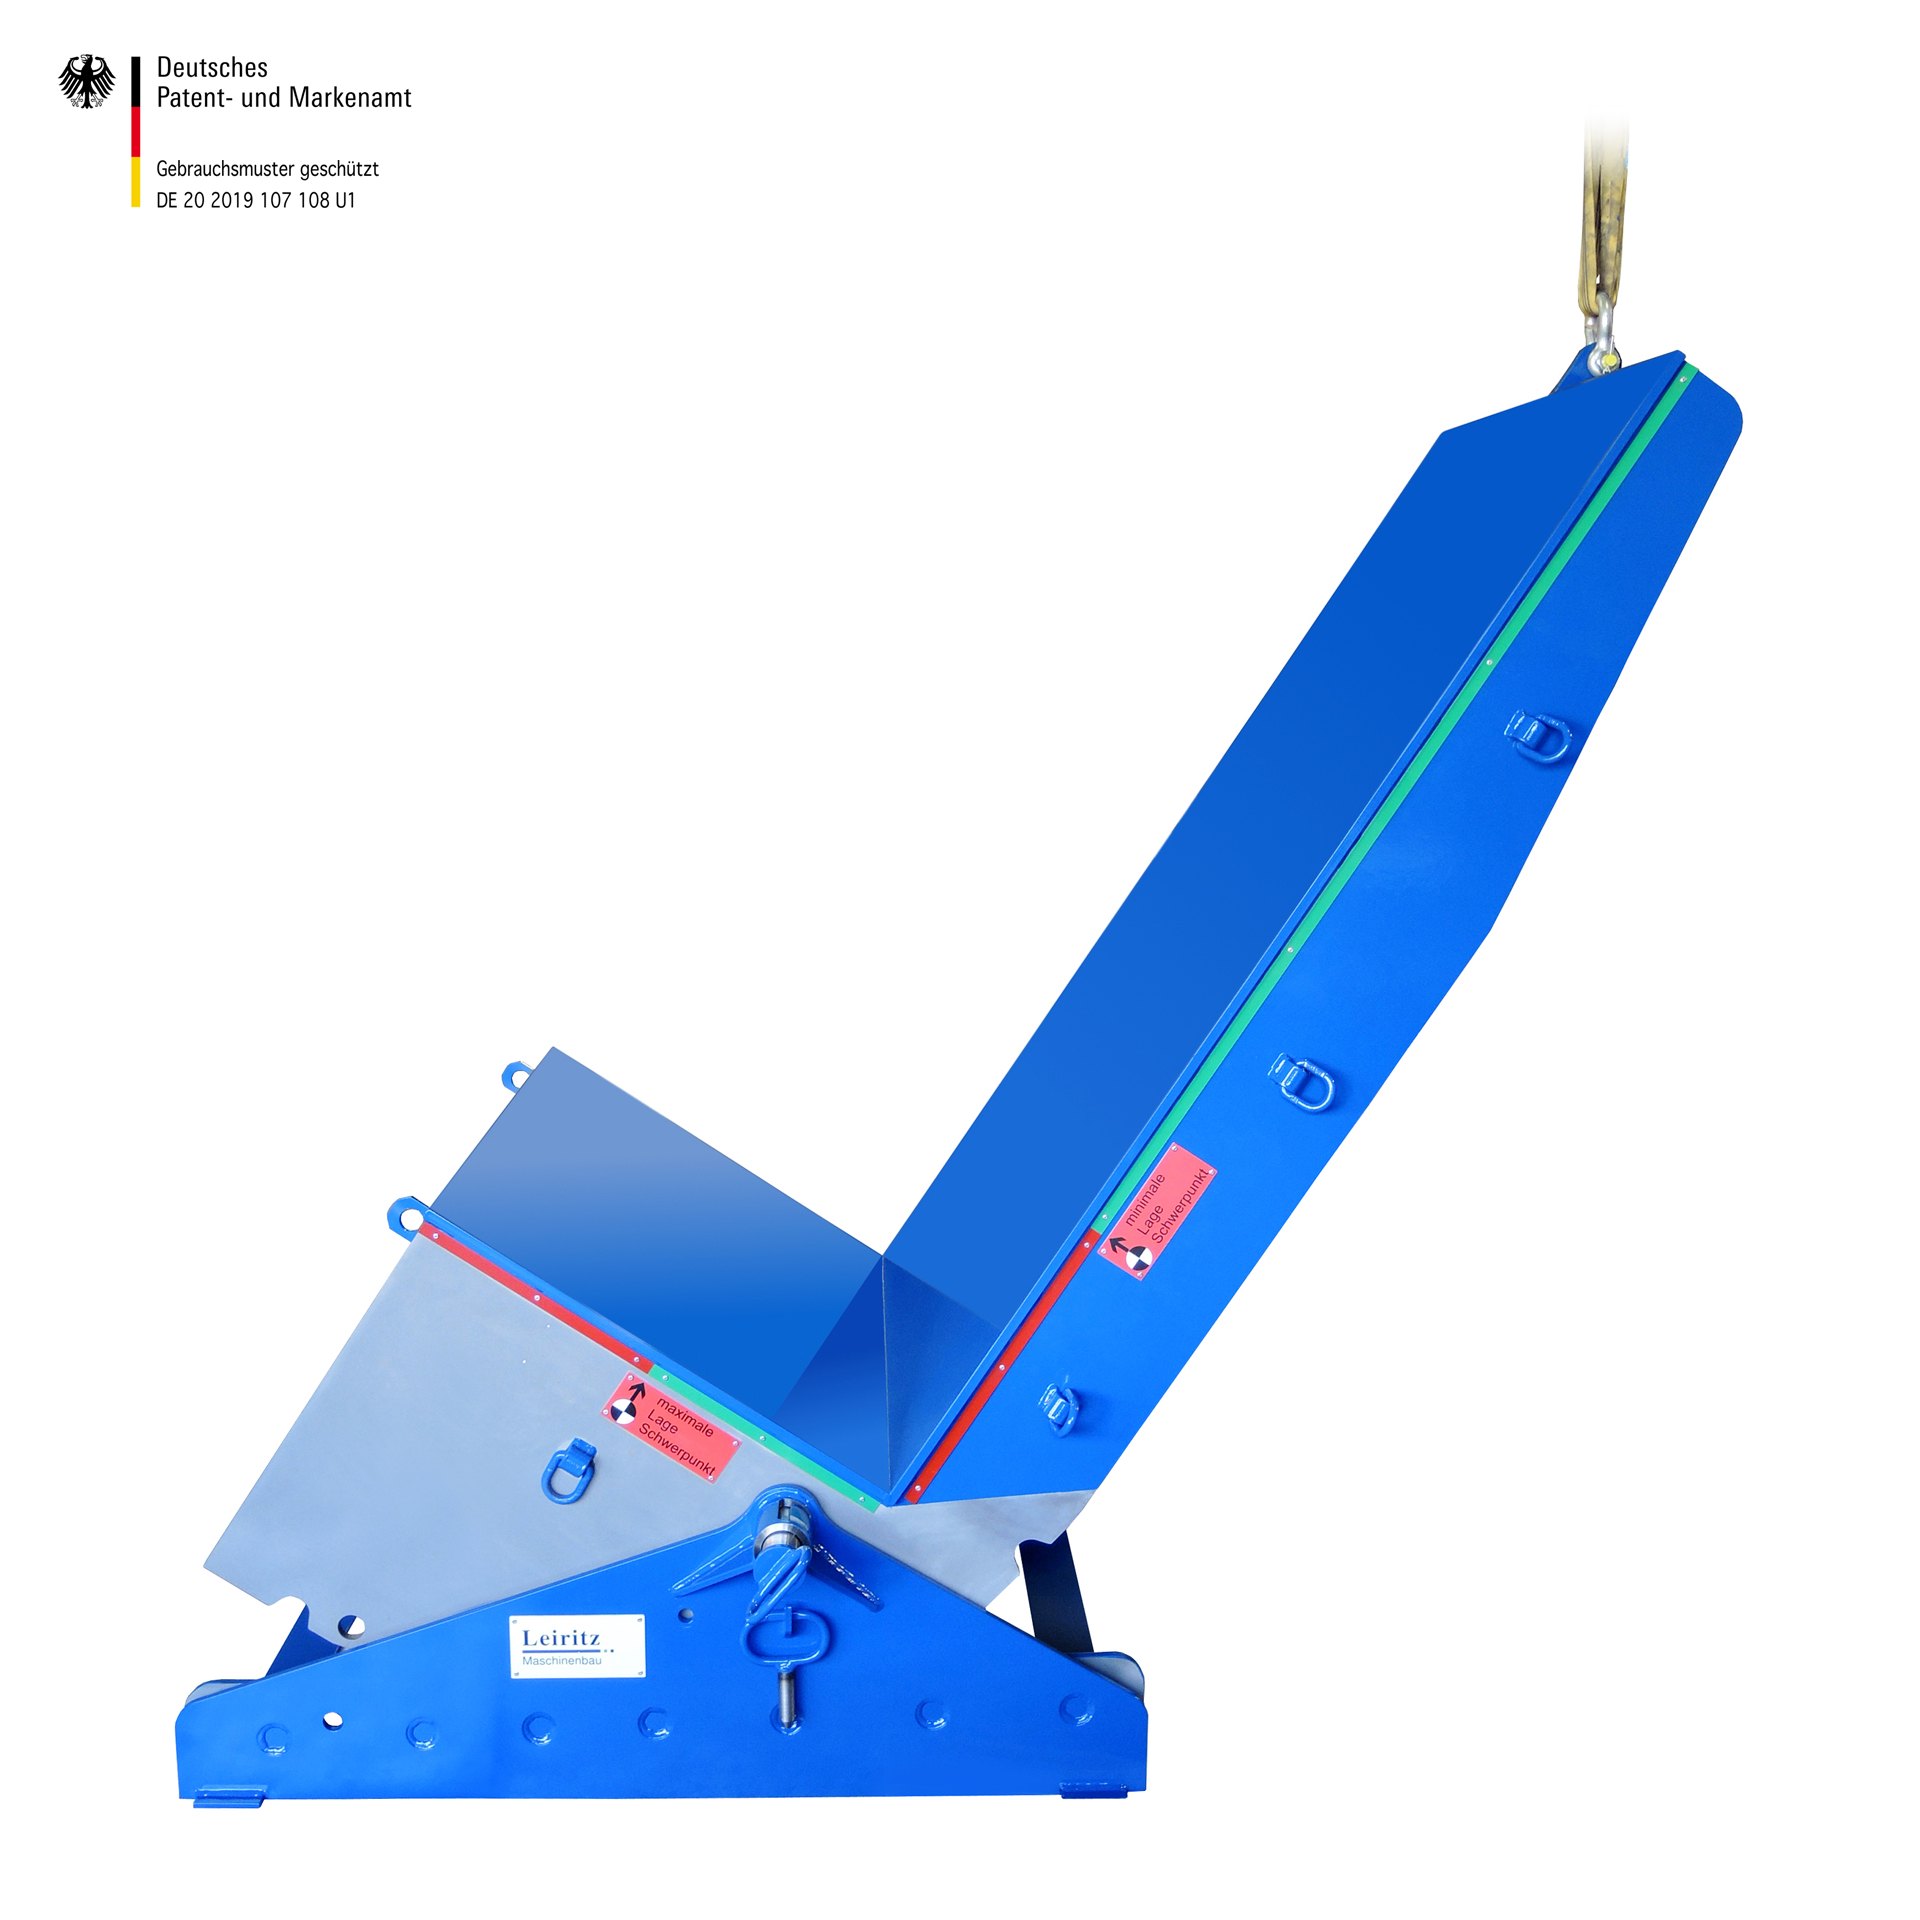 Tool-Mover from Leiritz Germany.